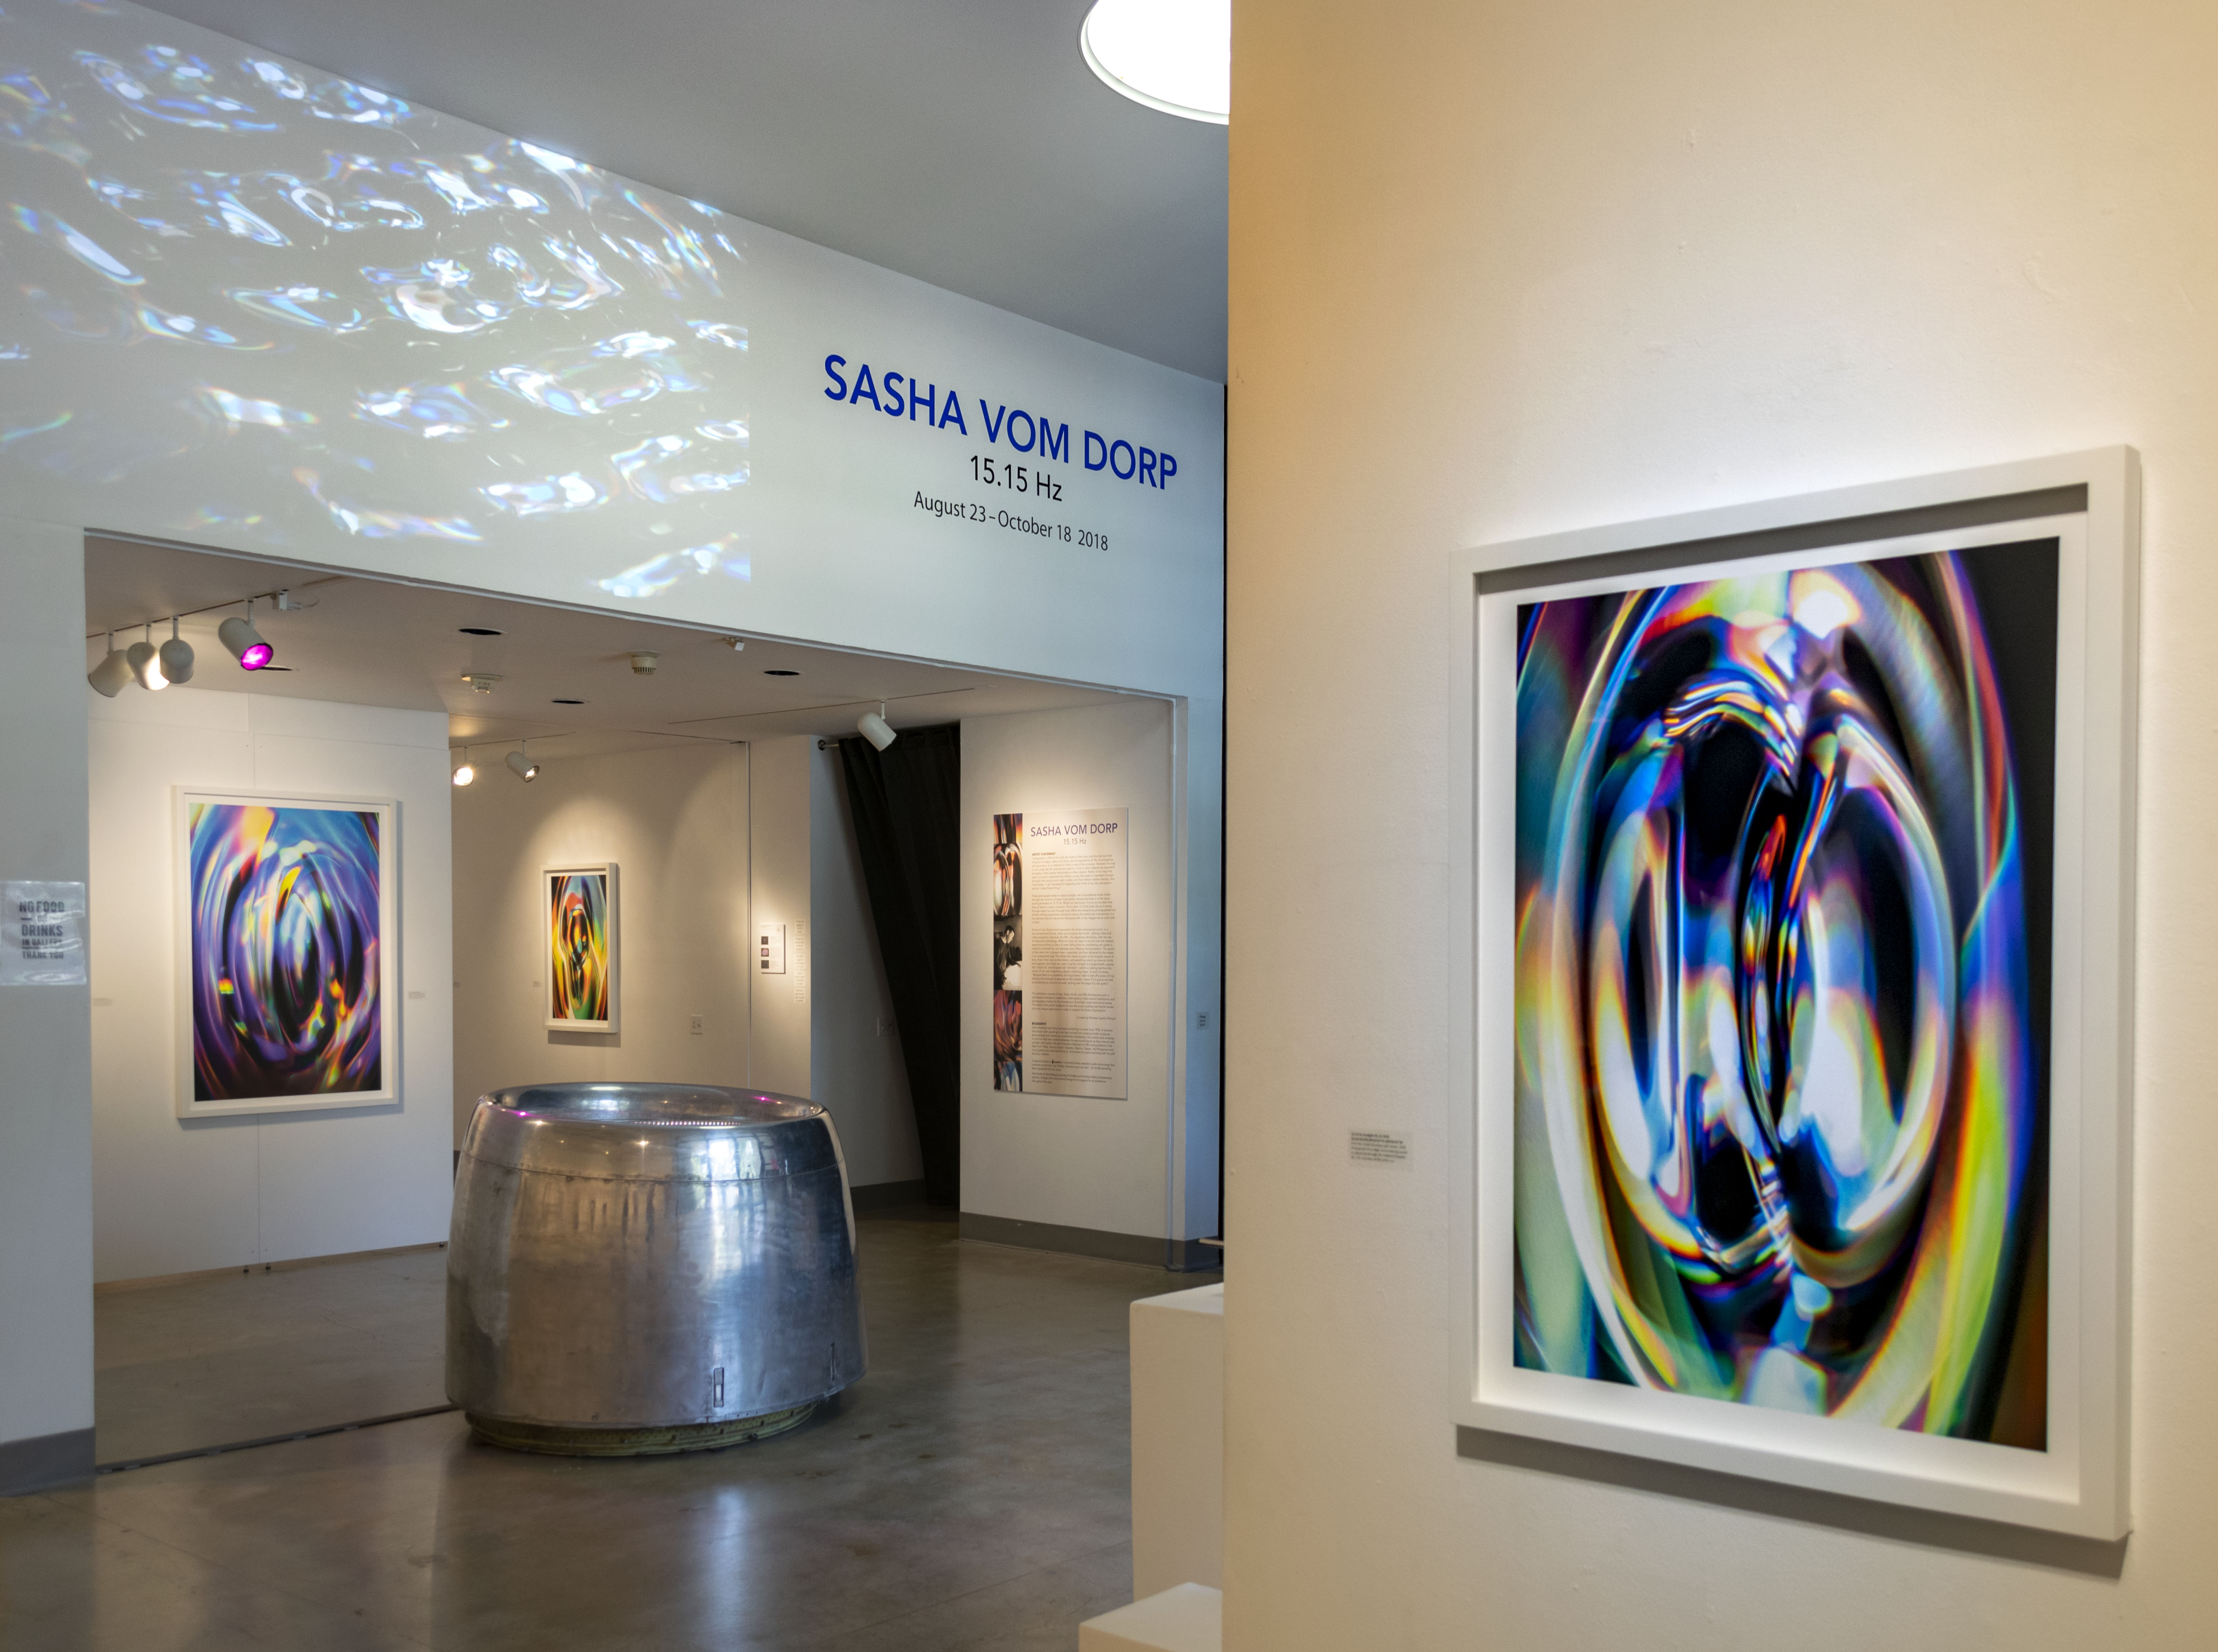 Front East gallery, Exhibition: Sasha vom Dorp: 15.15 Hz, Aug. 23 - Oct. 18, 2018, Curator: Michele Cairella Fillmore, W. Keith & Janet Kellogg Art Gallery, Cal Poly Pomona. [New Mexico-based artist Sasha vom Dorp interplay of light, sound and water in microscopic moments (Photo Credit: William W. Gunn)]